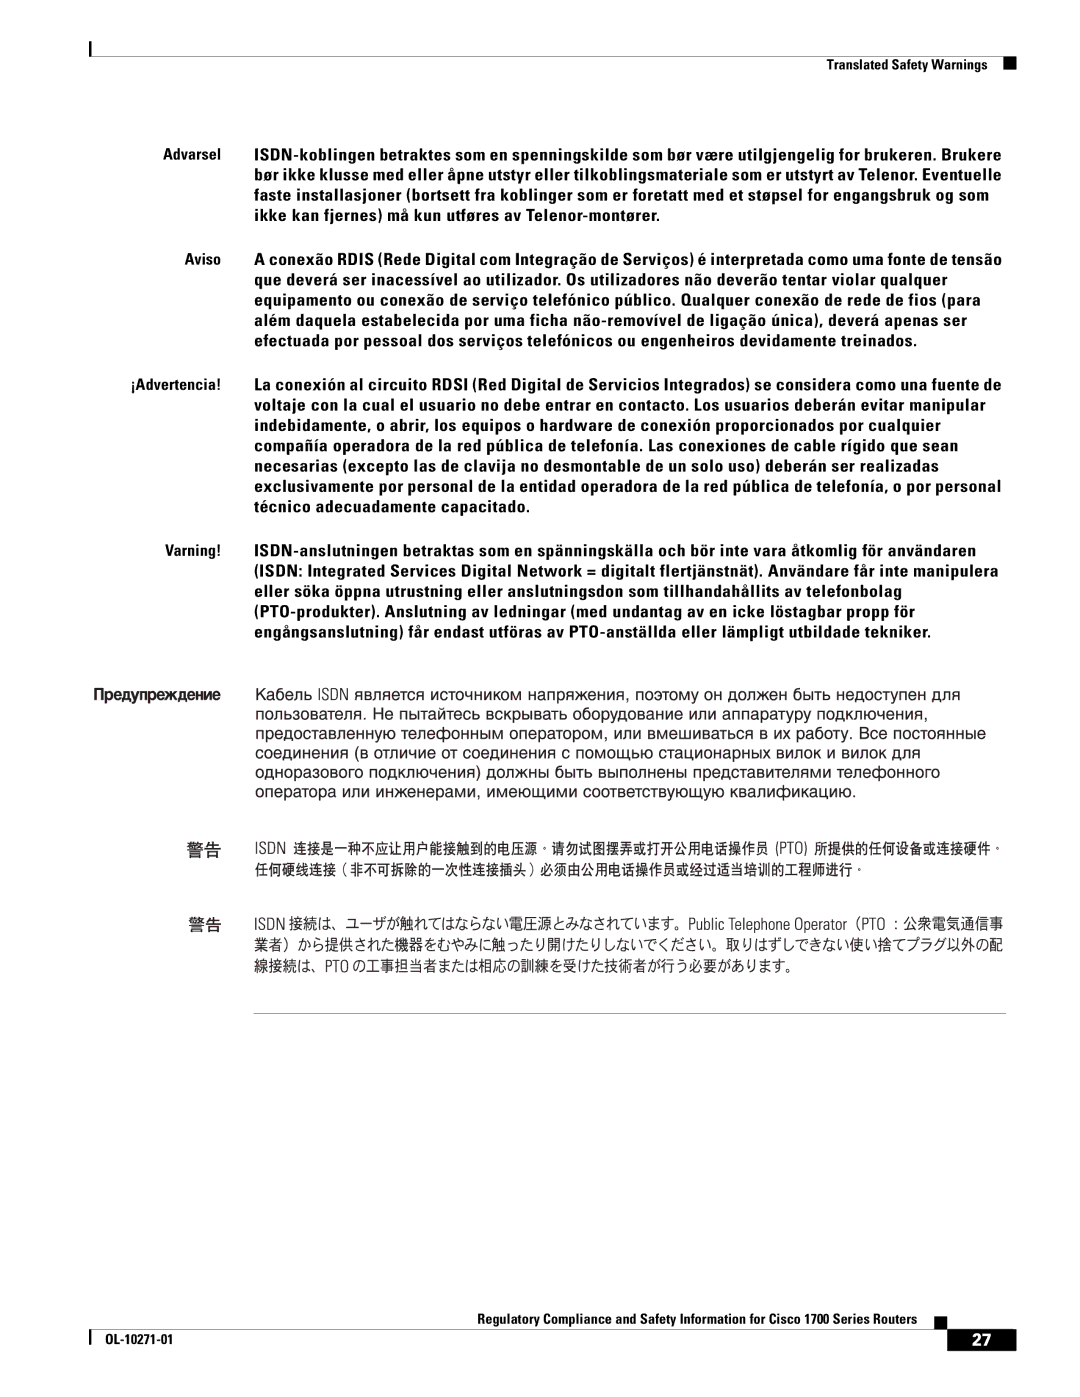 Cisco Systems Cisco 1700 manual Translated Safety Warnings 